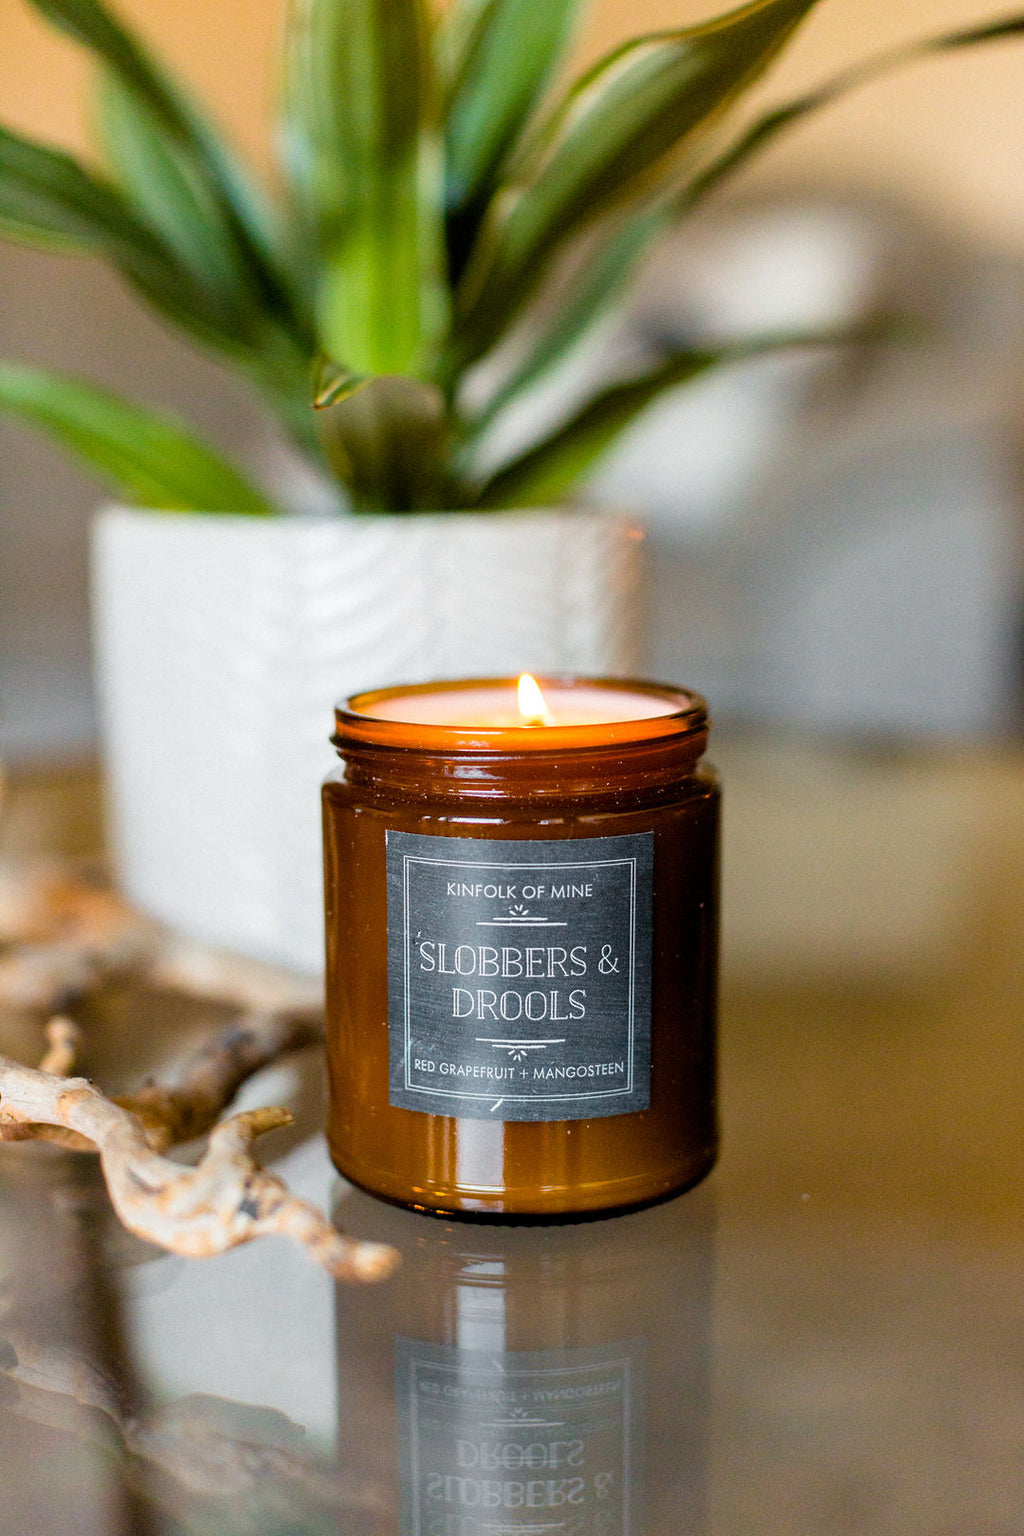 Slobbers & Drools 9oz Candle